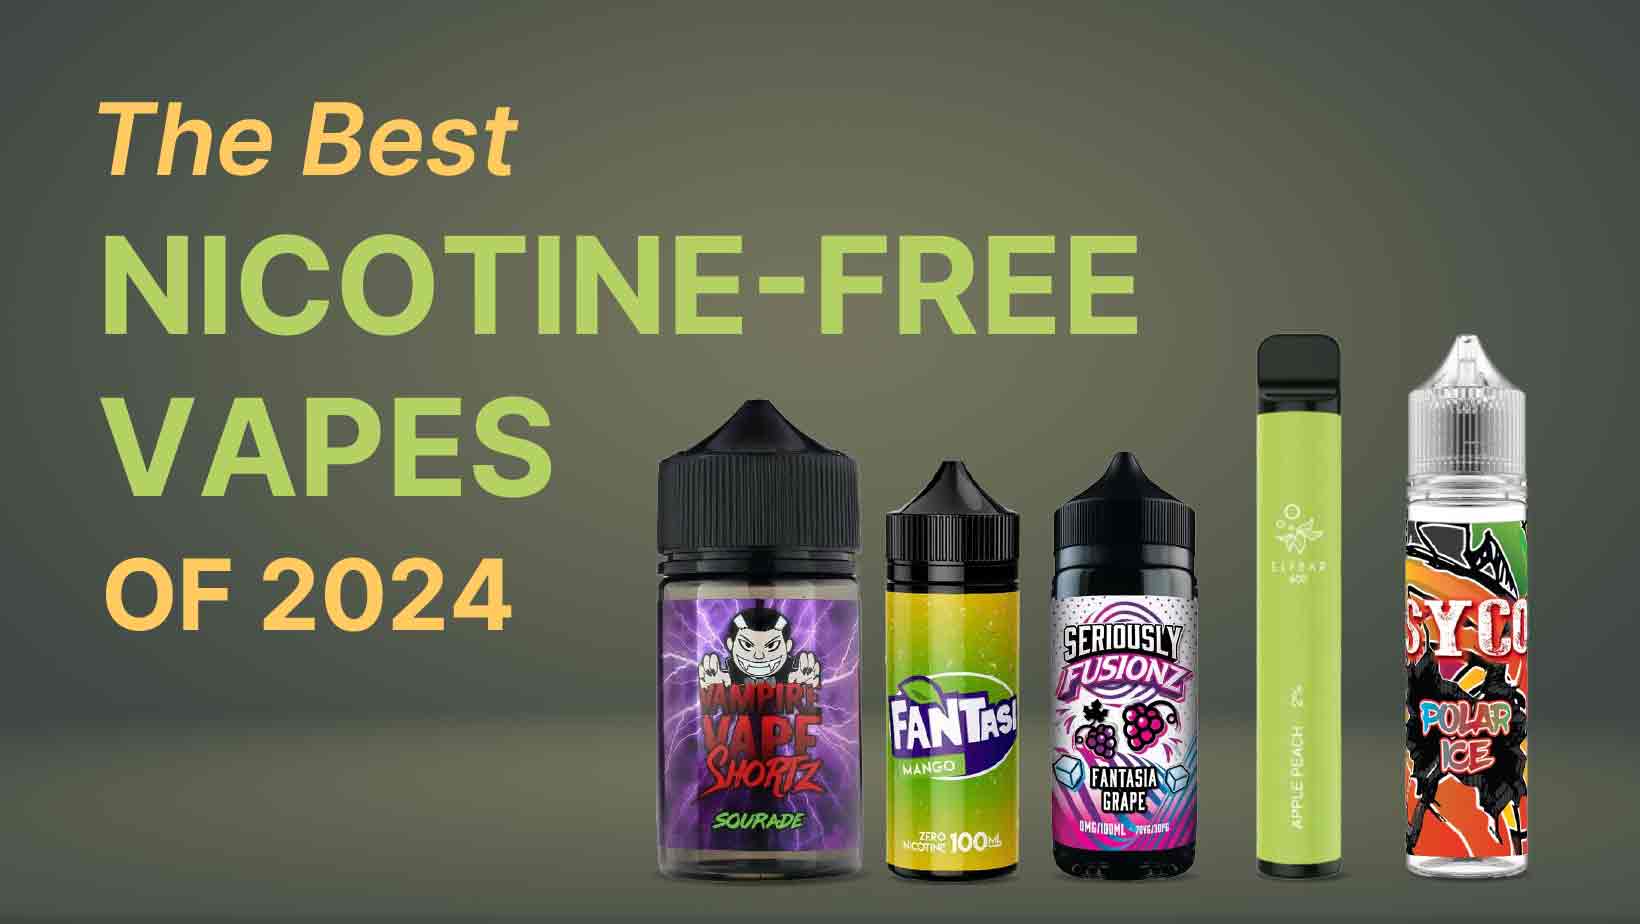 The Best Nicotine-Free Vapes of 2024!